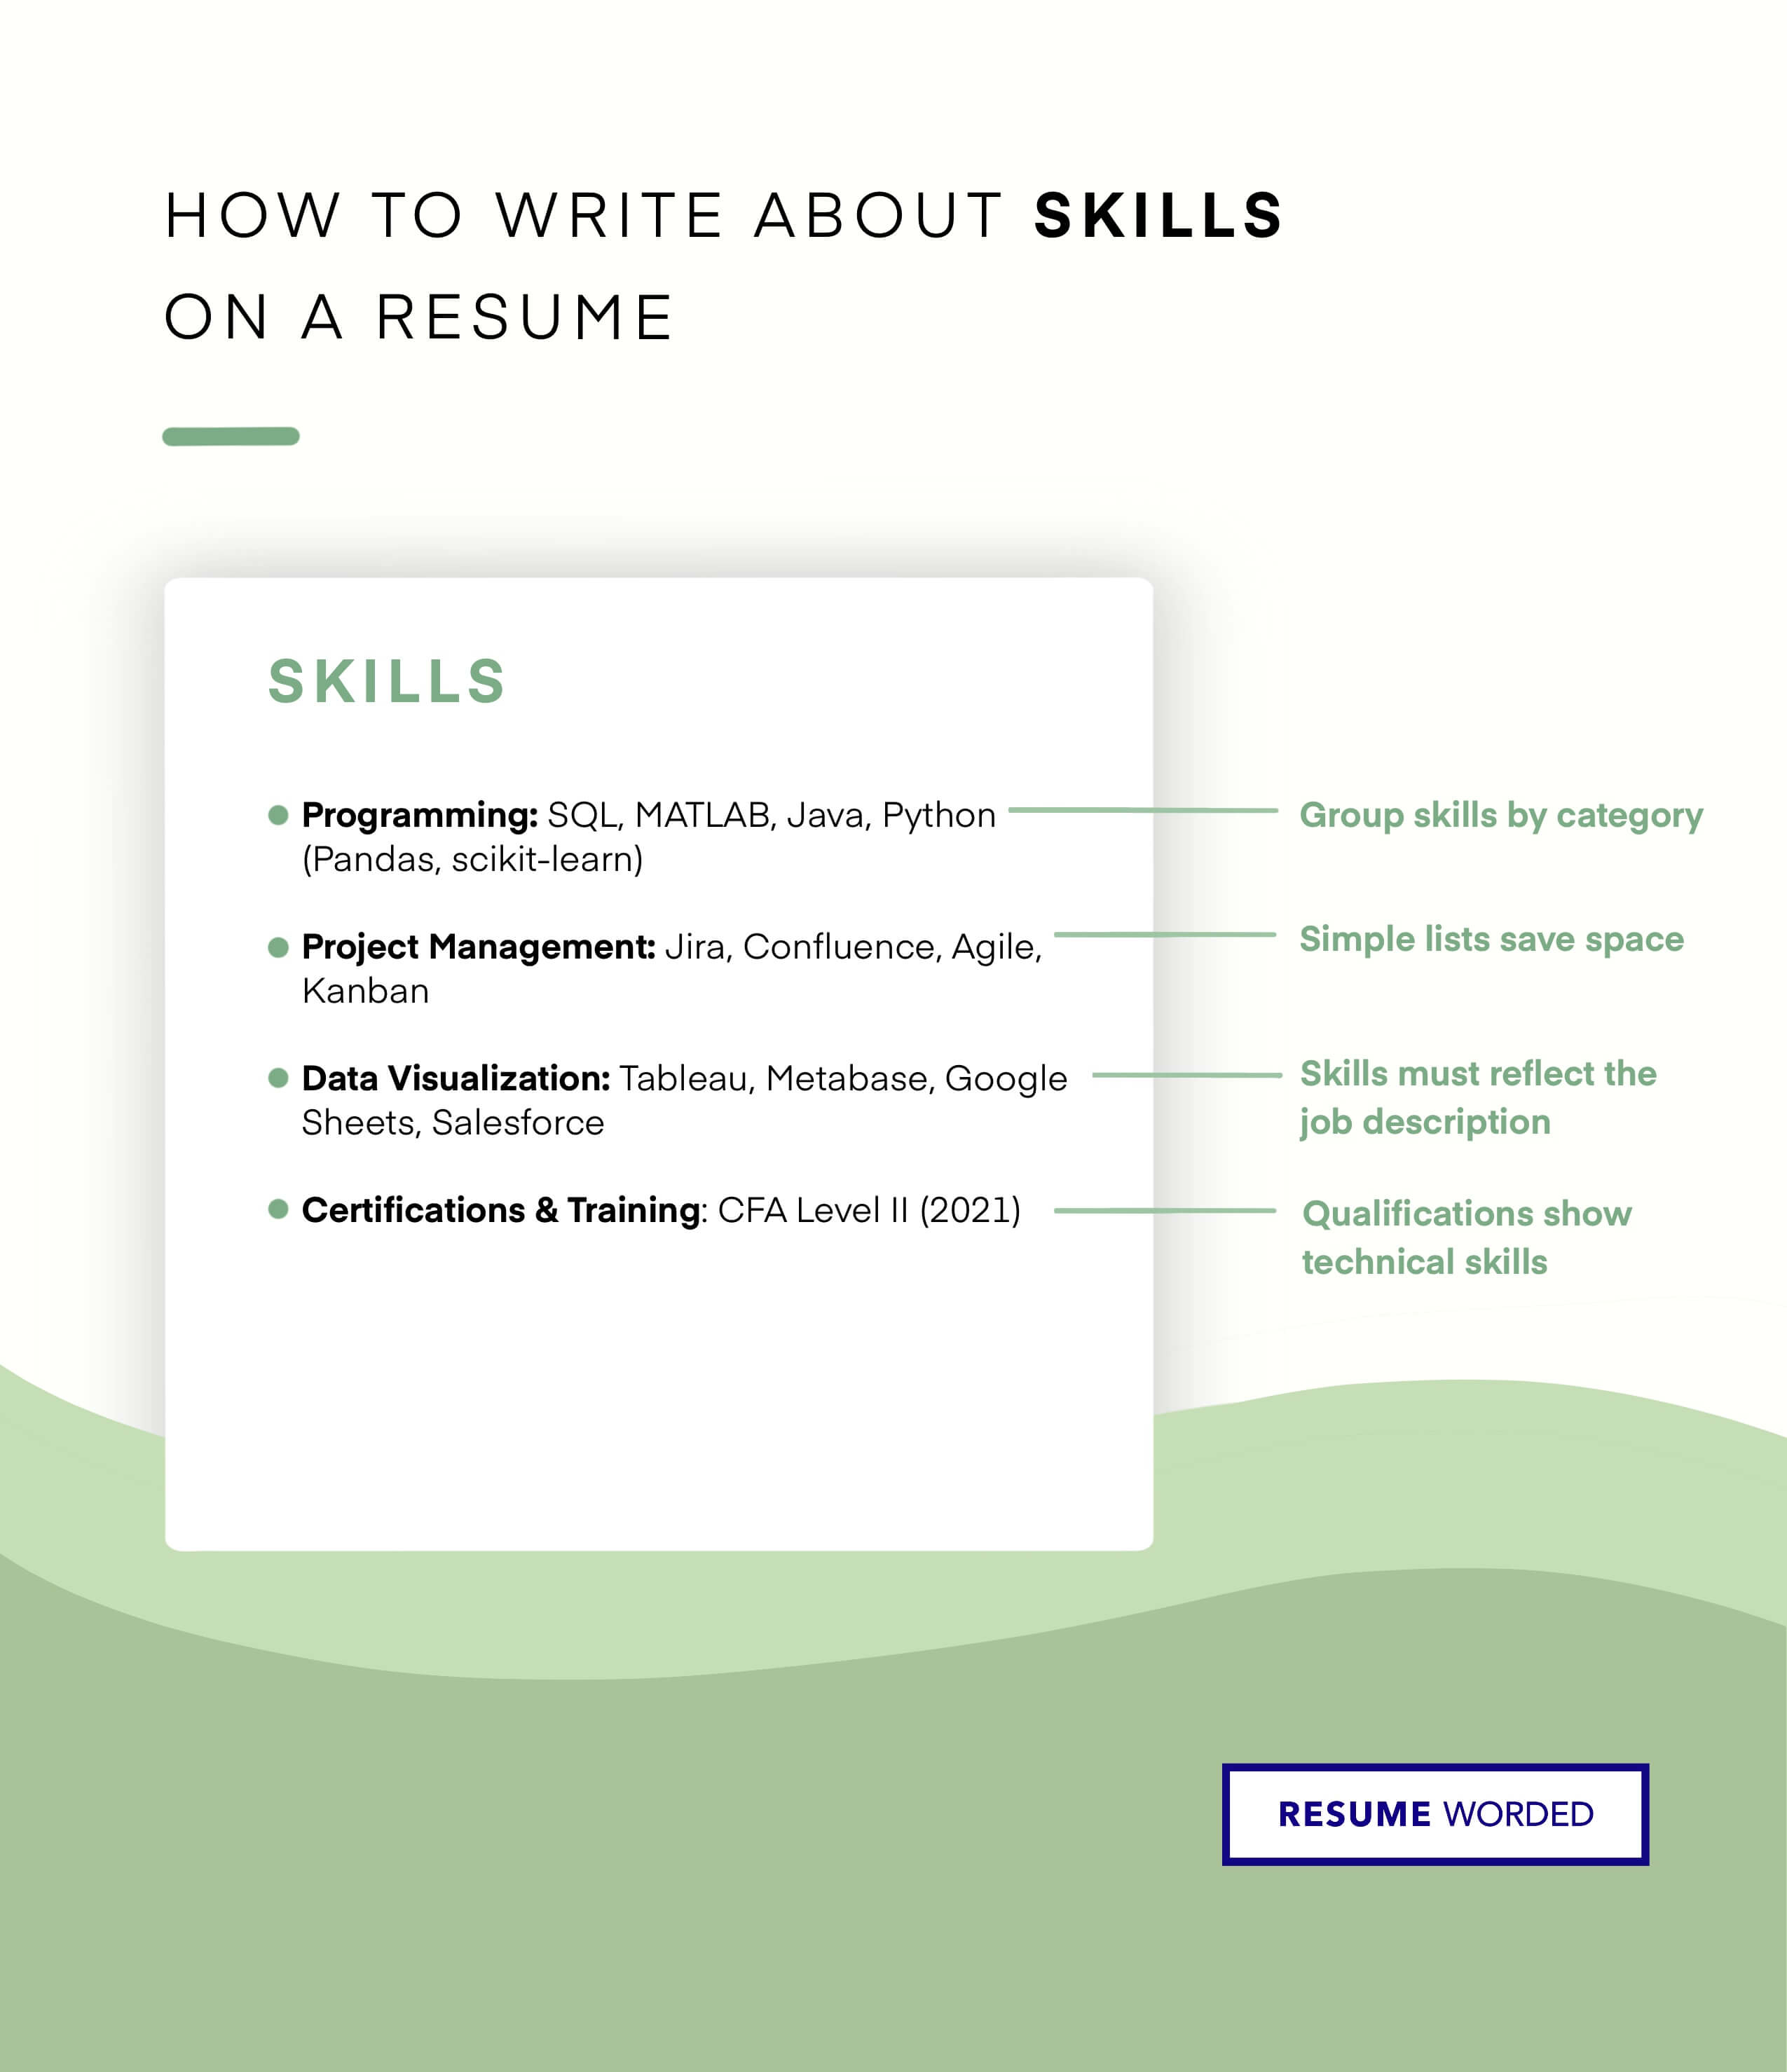 List practical skills in your skills section. - Correctional Officer Resume